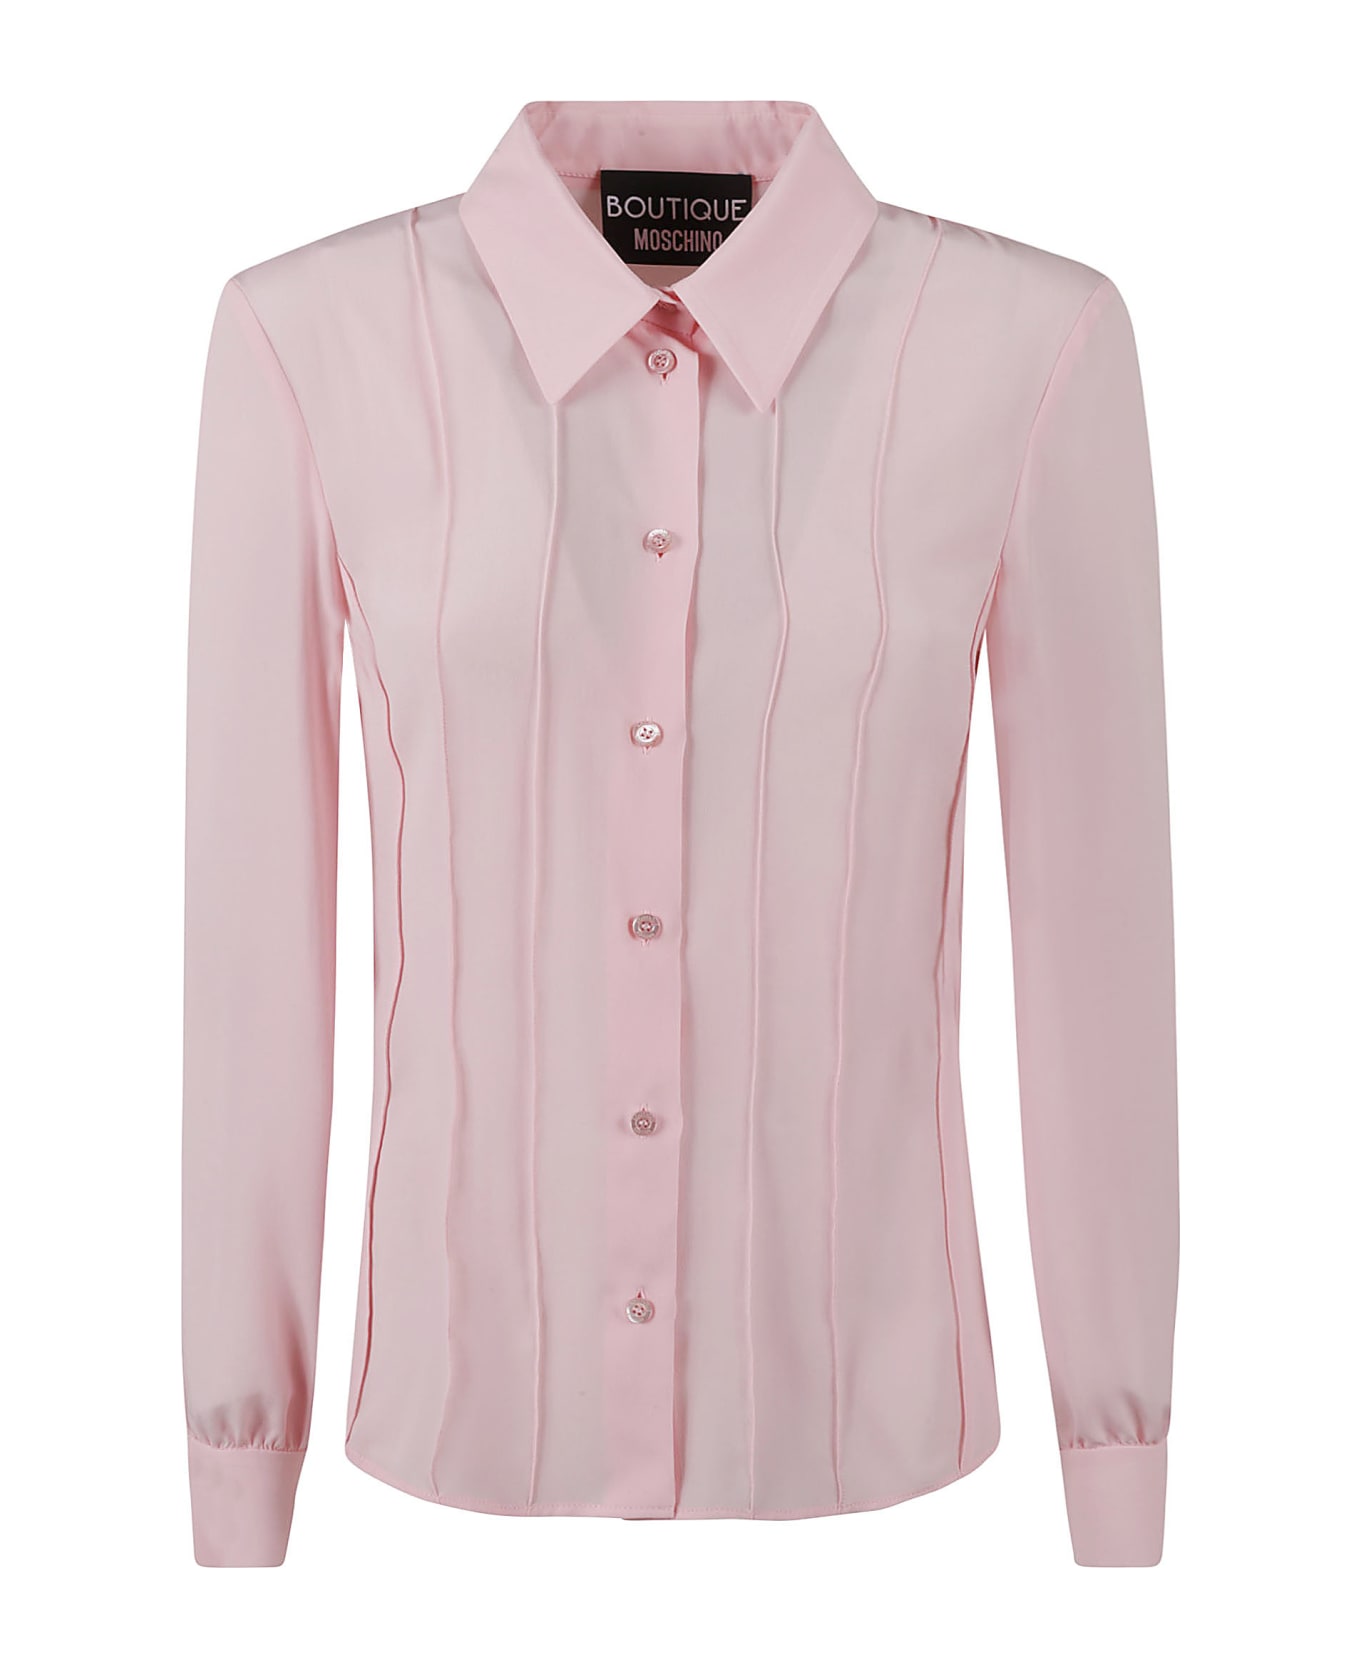 Boutique Moschino Pleated Shirt - Pink シャツ